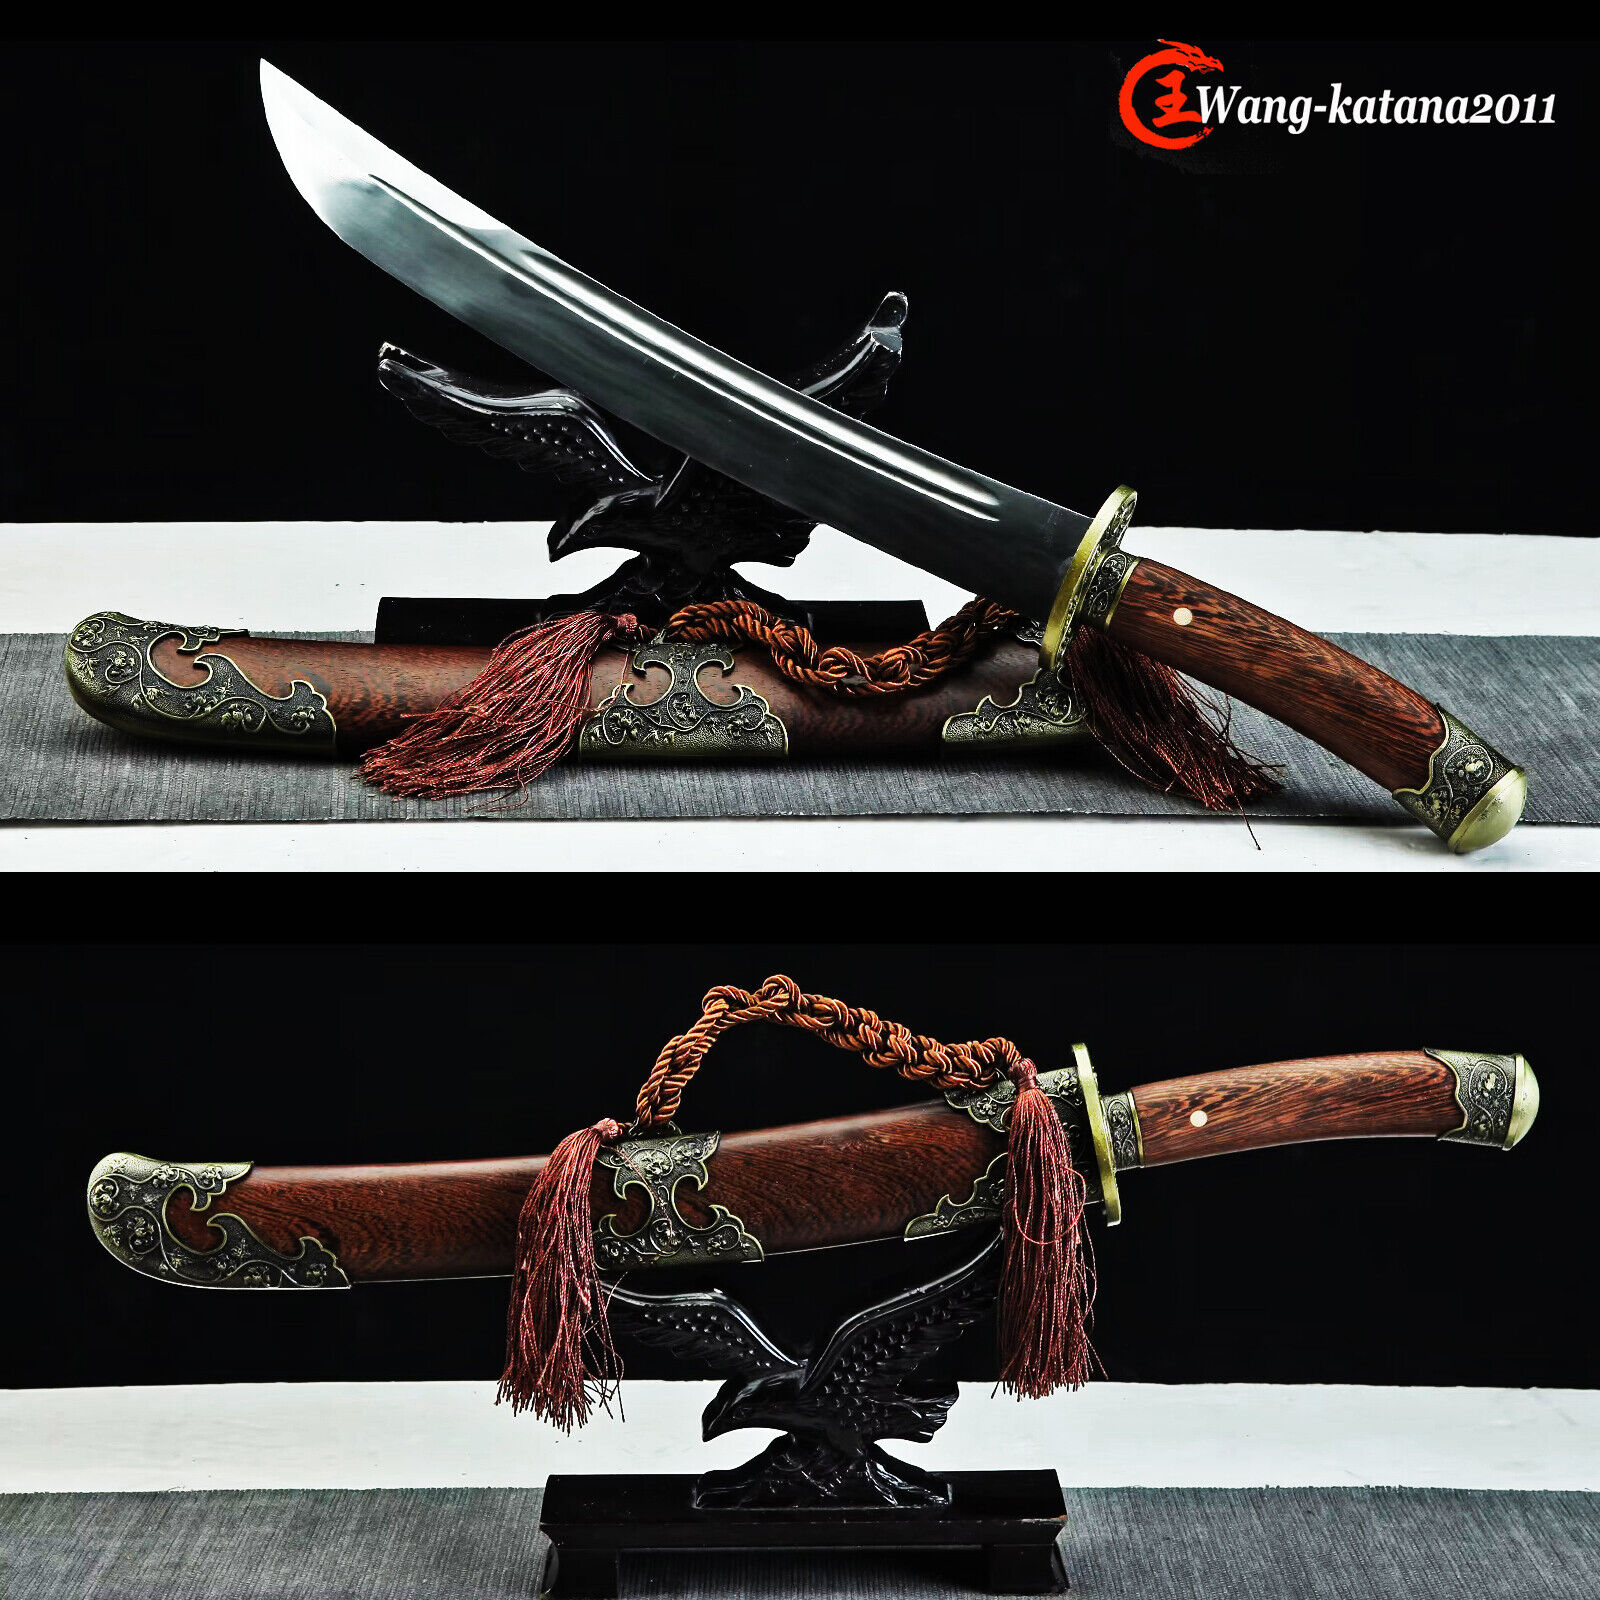 20\'\'Chinese Tanto 1095 Steel Rosewood Qing Dynasty DAO Self-defence Short Sword